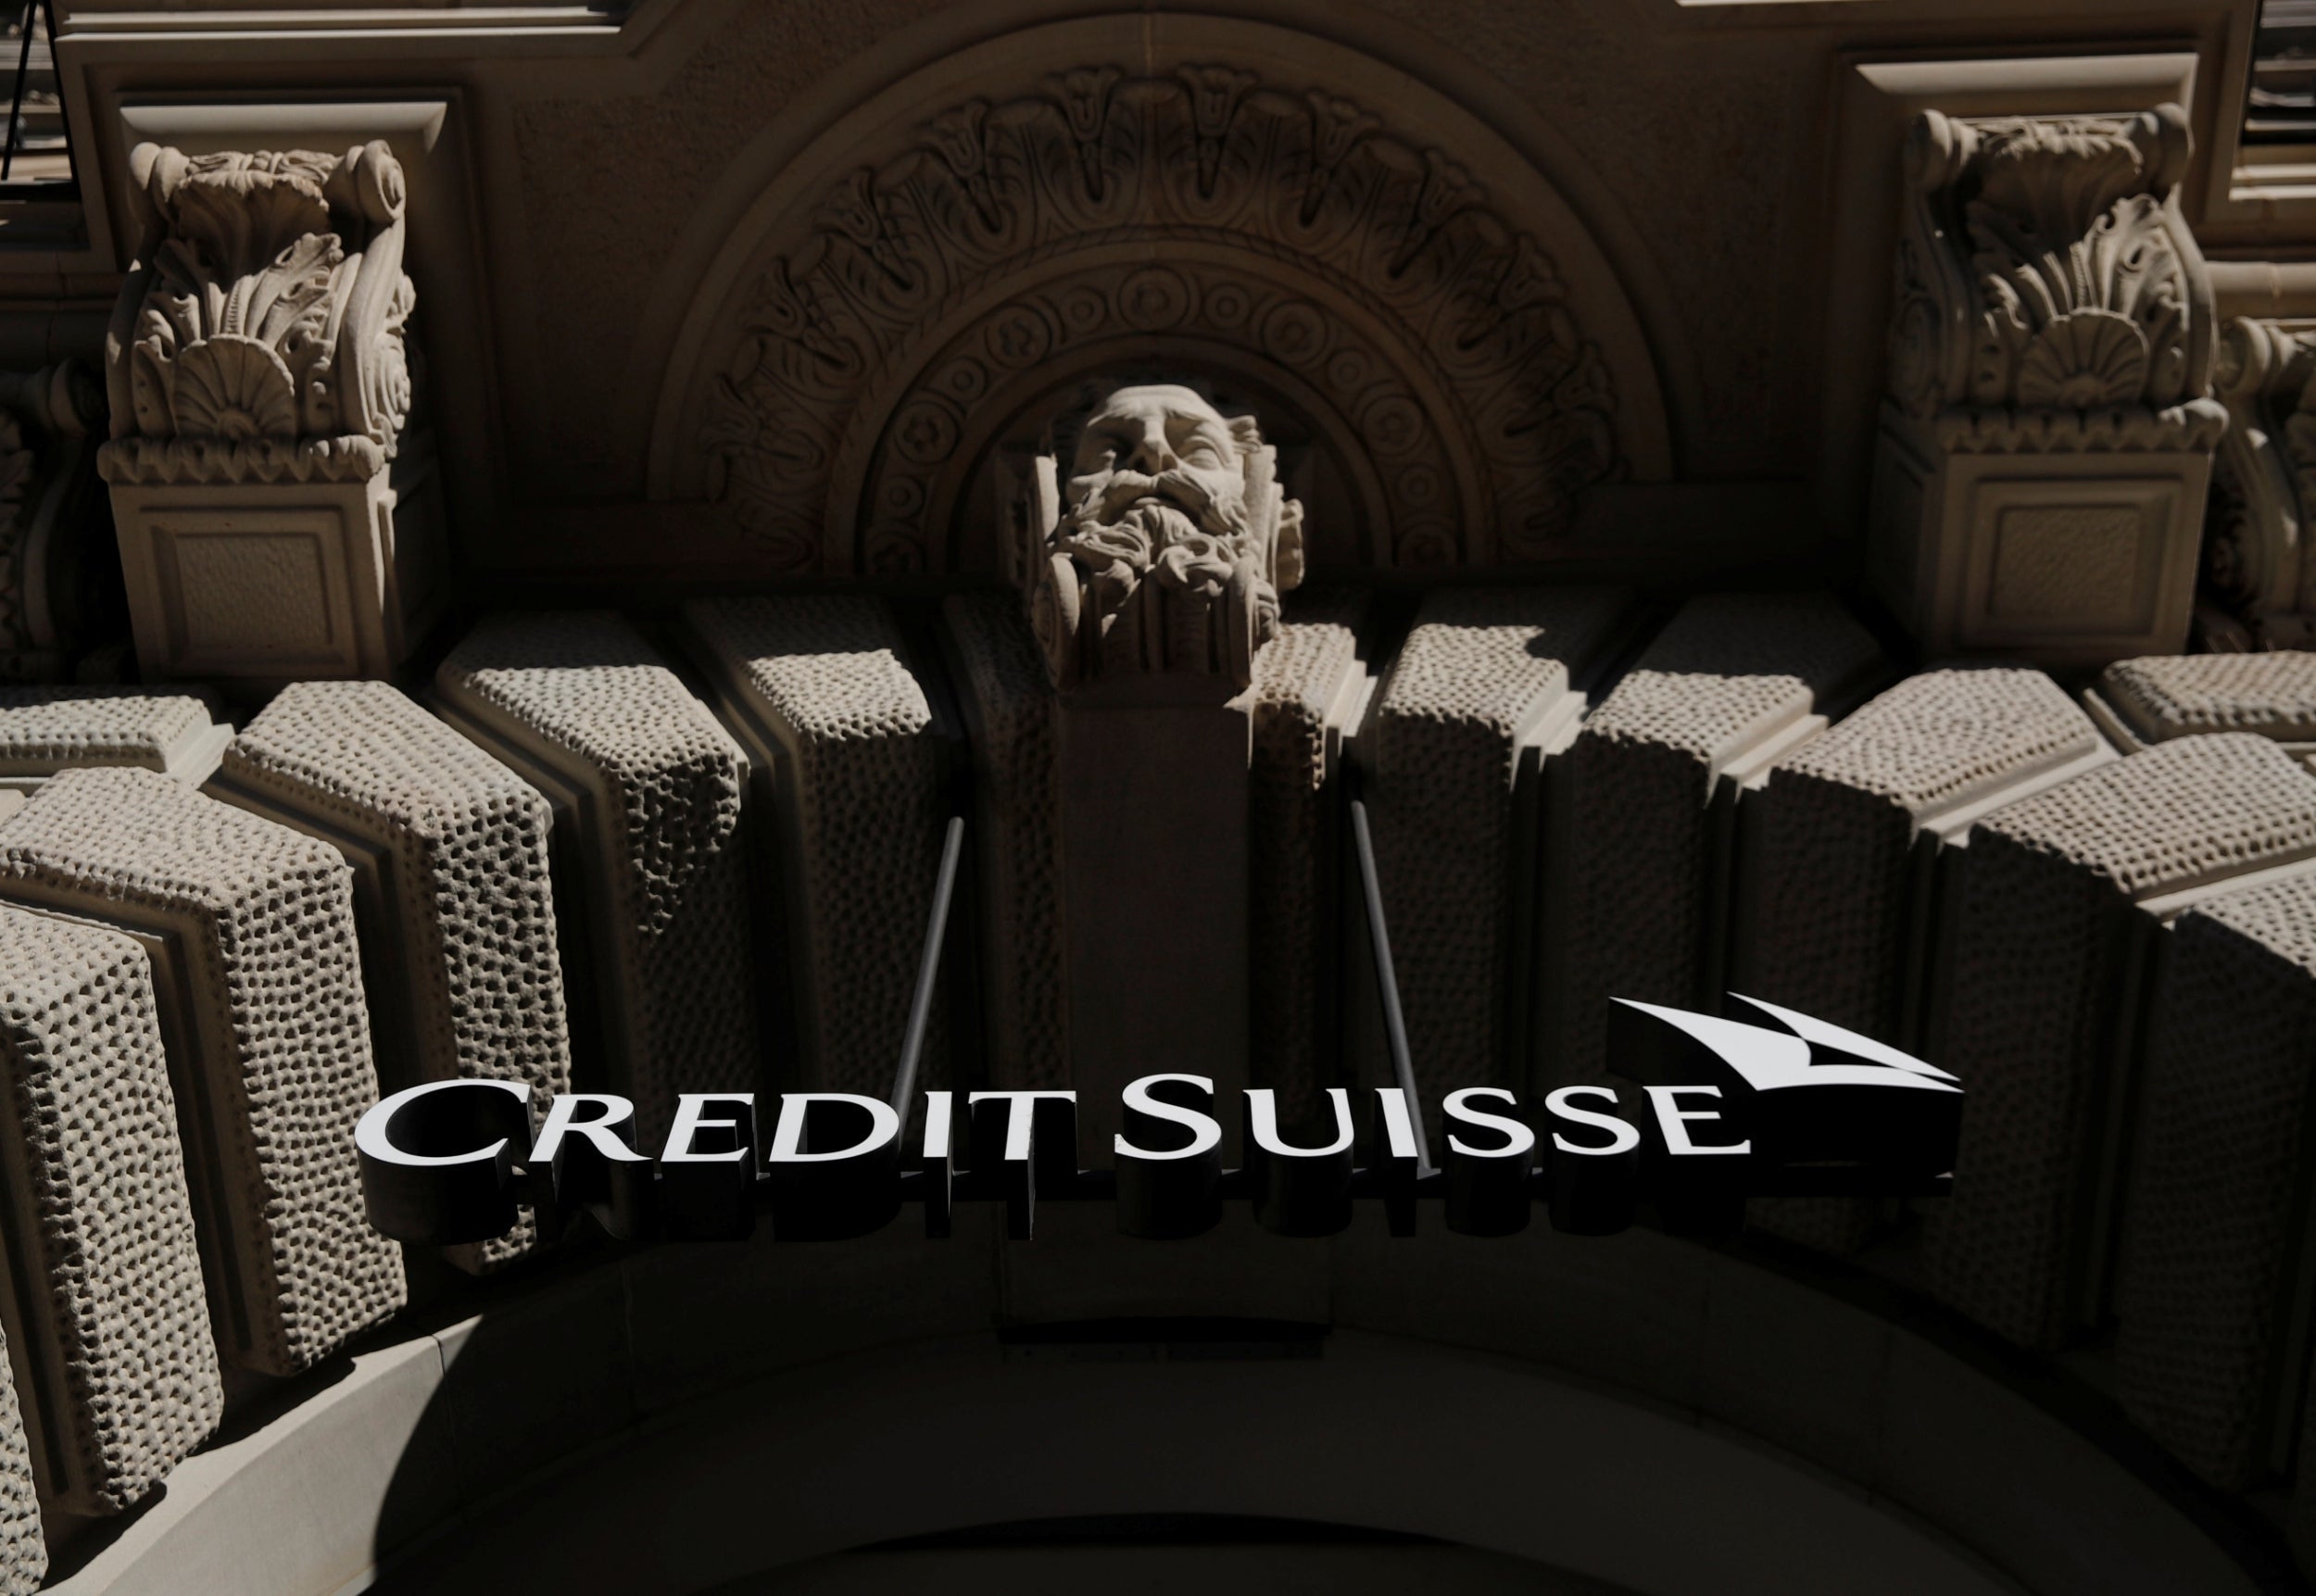 Credit Suisse turmoil and resignations follow banker's suicide